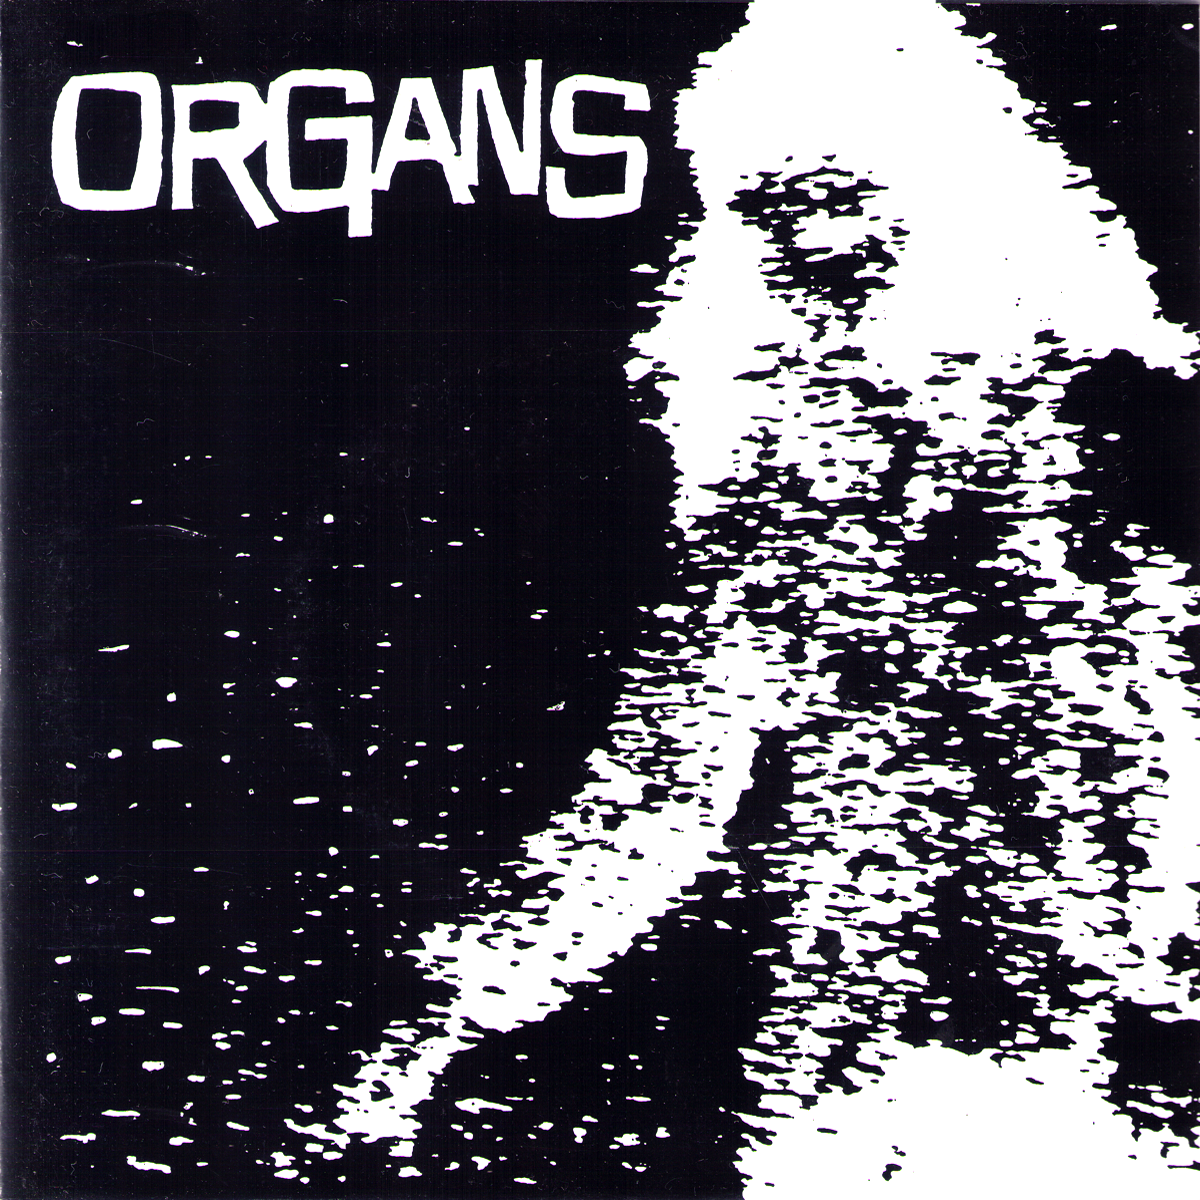 Organs- Breathing With The Dead 7” ~SPACESHITS!